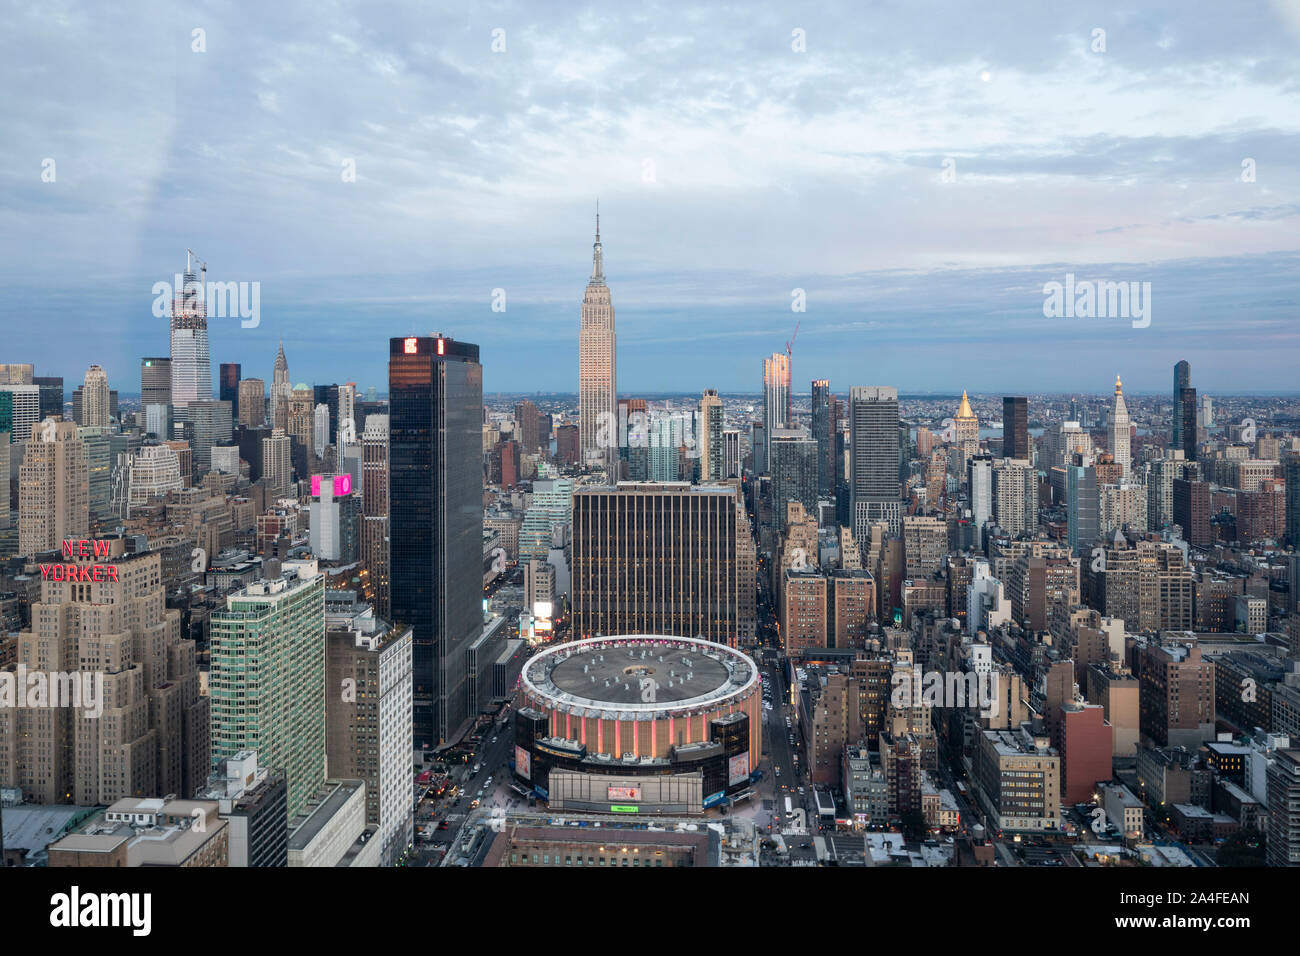 NEW YORK CITY, NY - October 5, 2019: Aerial view of the Madison Square Garden in Manhattan, New York City, NY, USA, looking West. Stock Photo